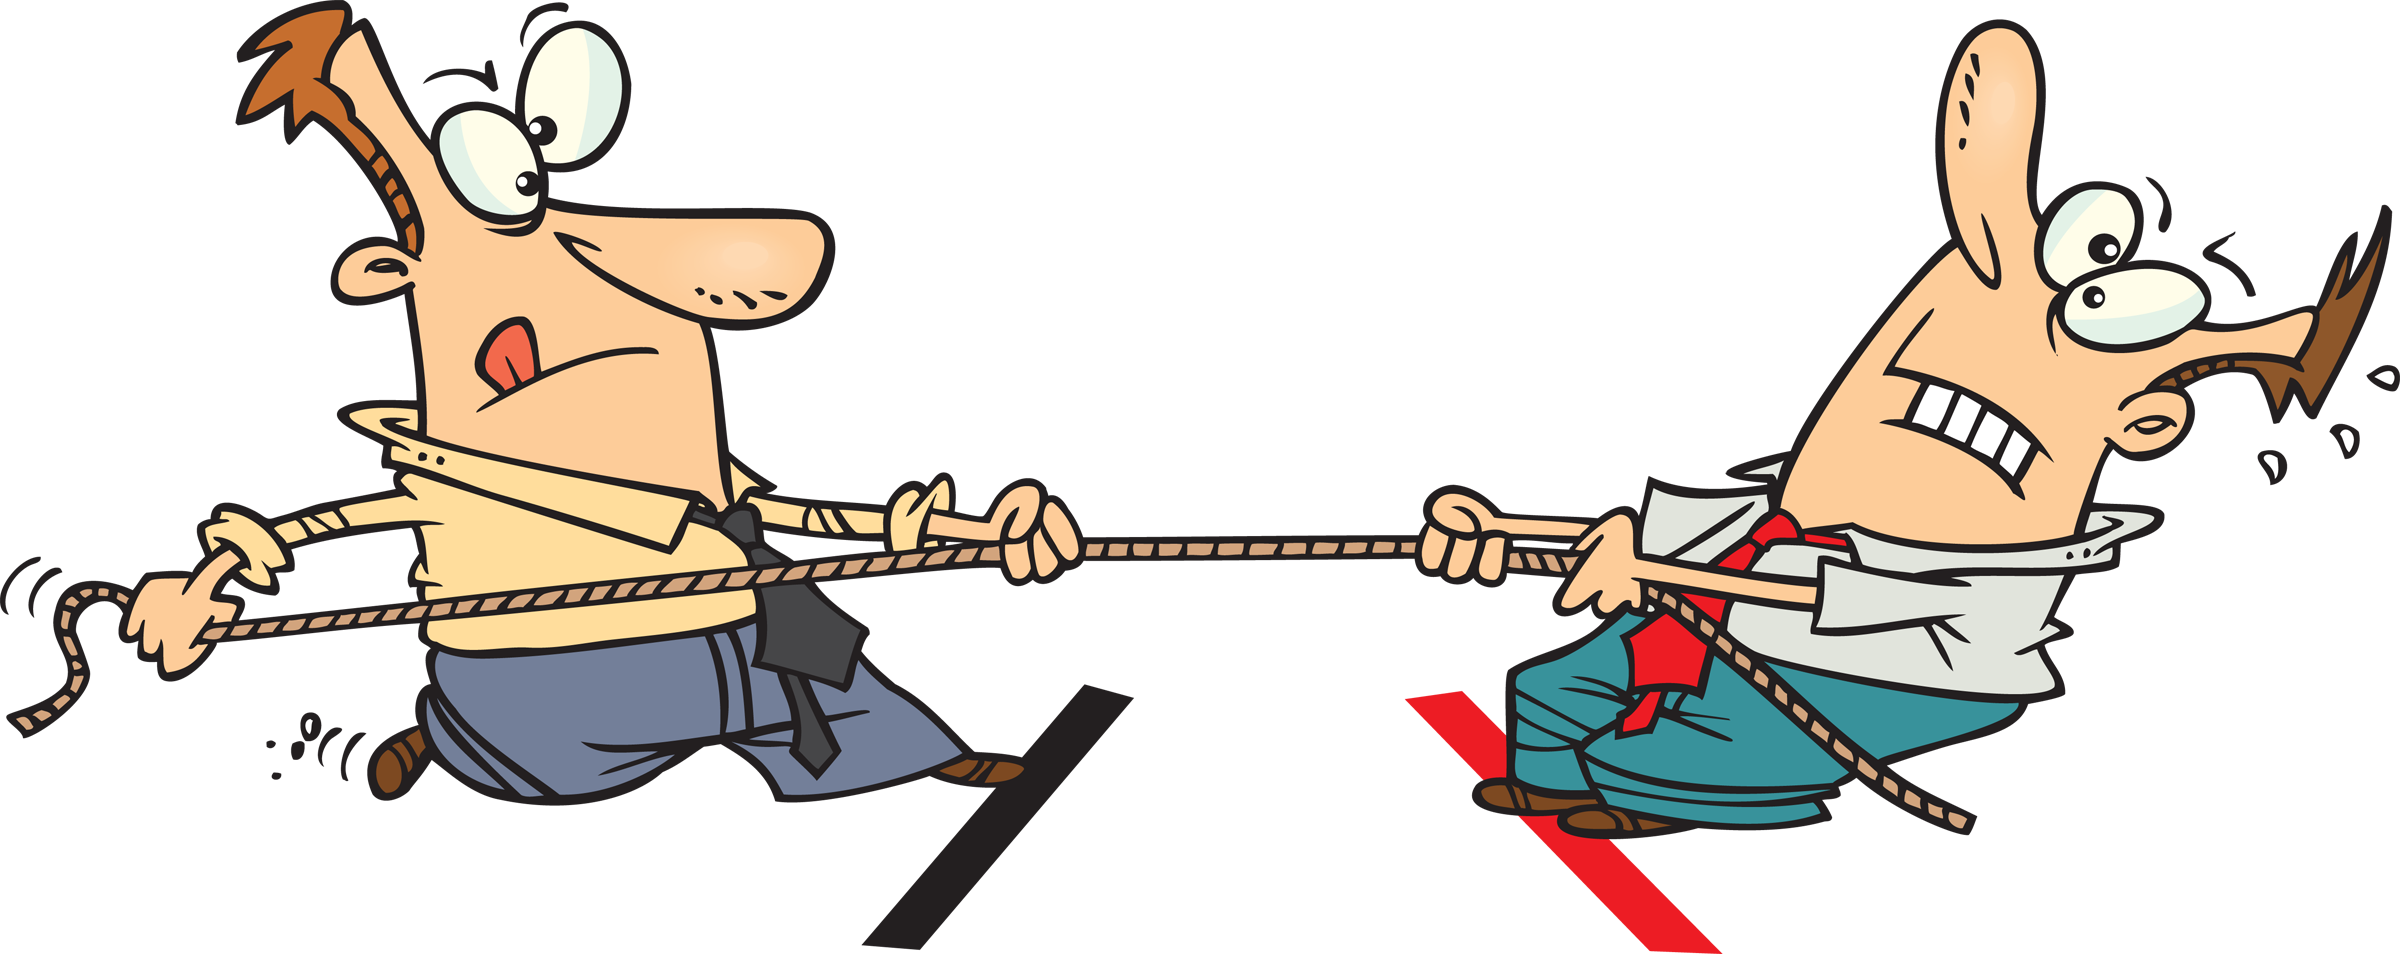 tug of war clipart images - photo #11